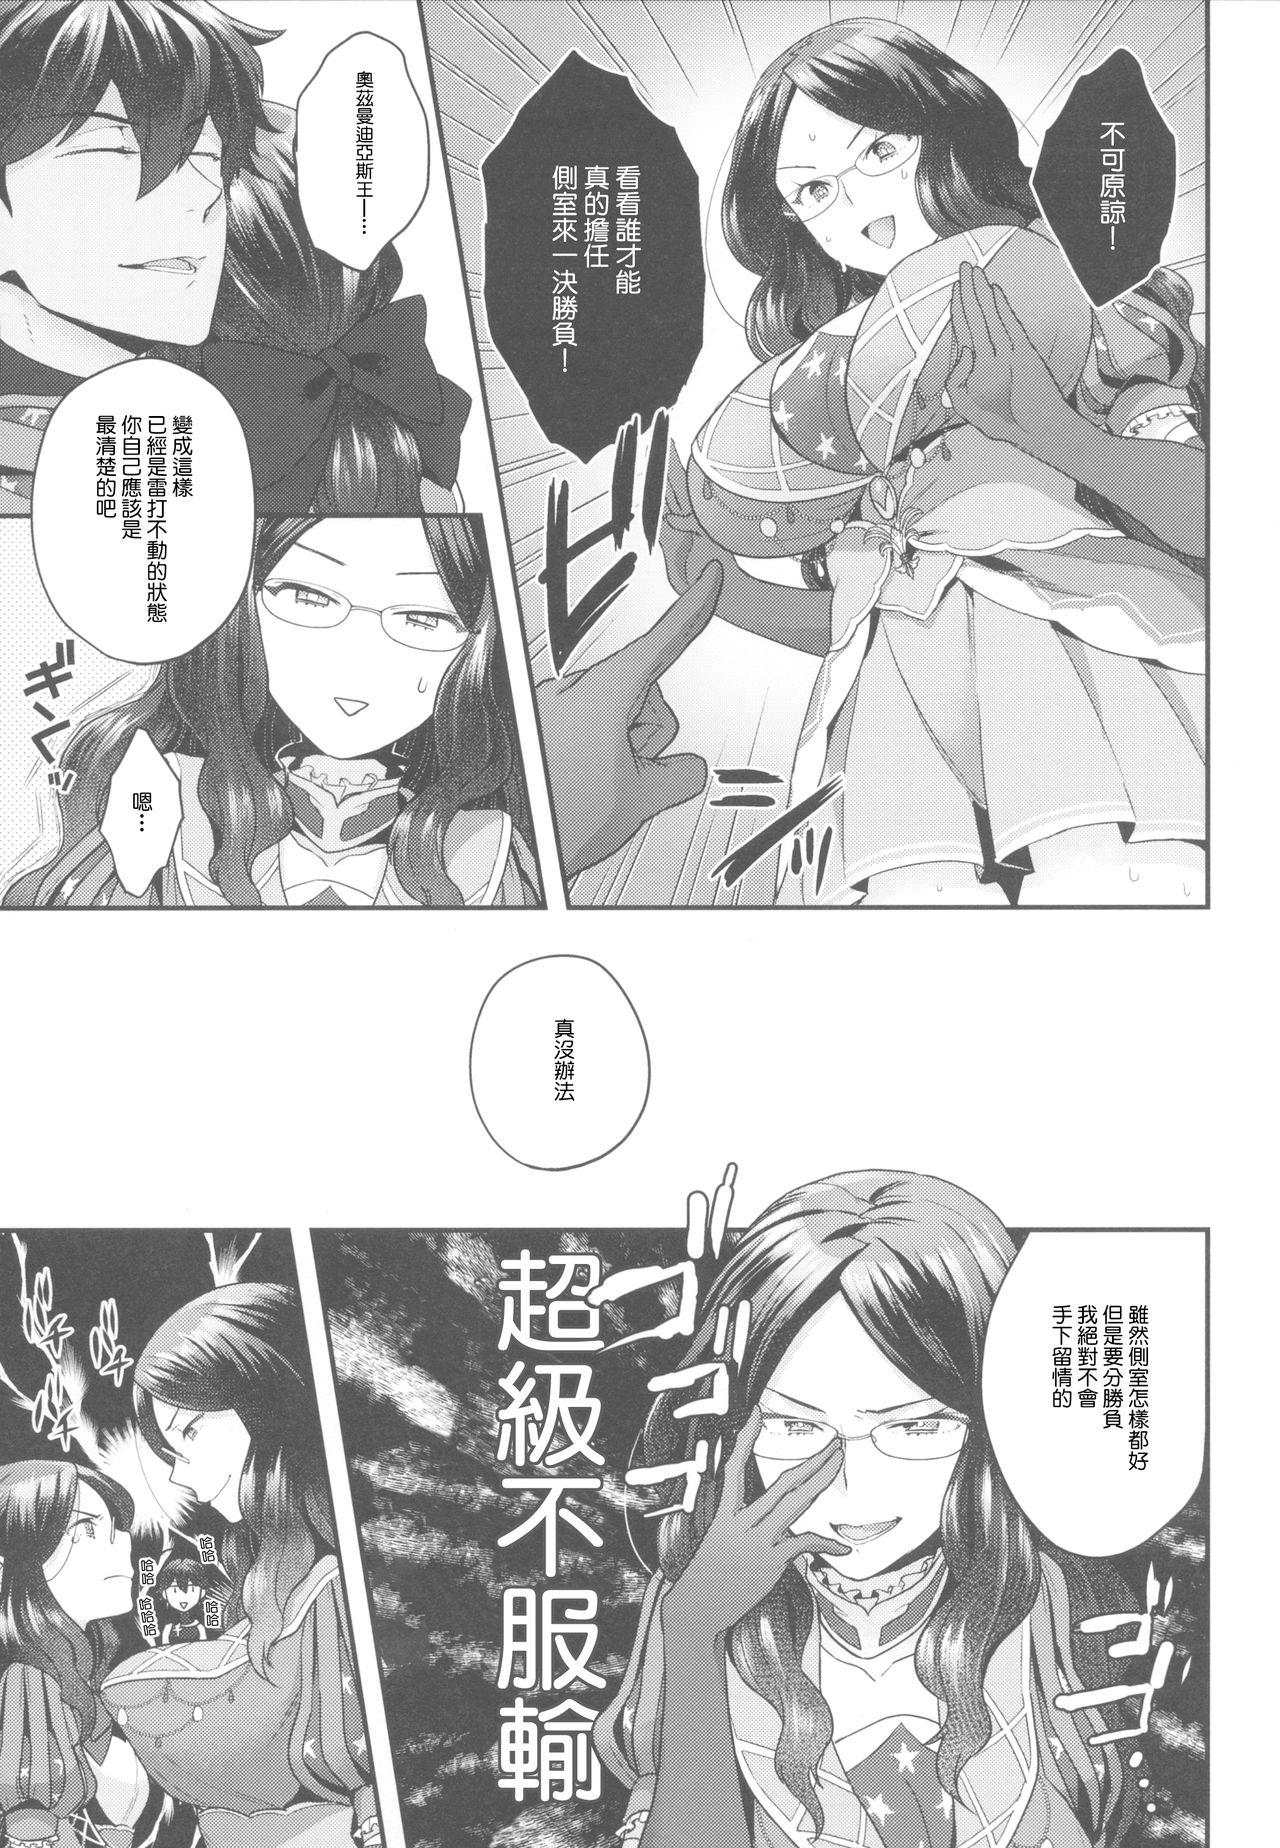 Interracial Sex OJY1DVI2 - Fate grand order Kinky - Page 6